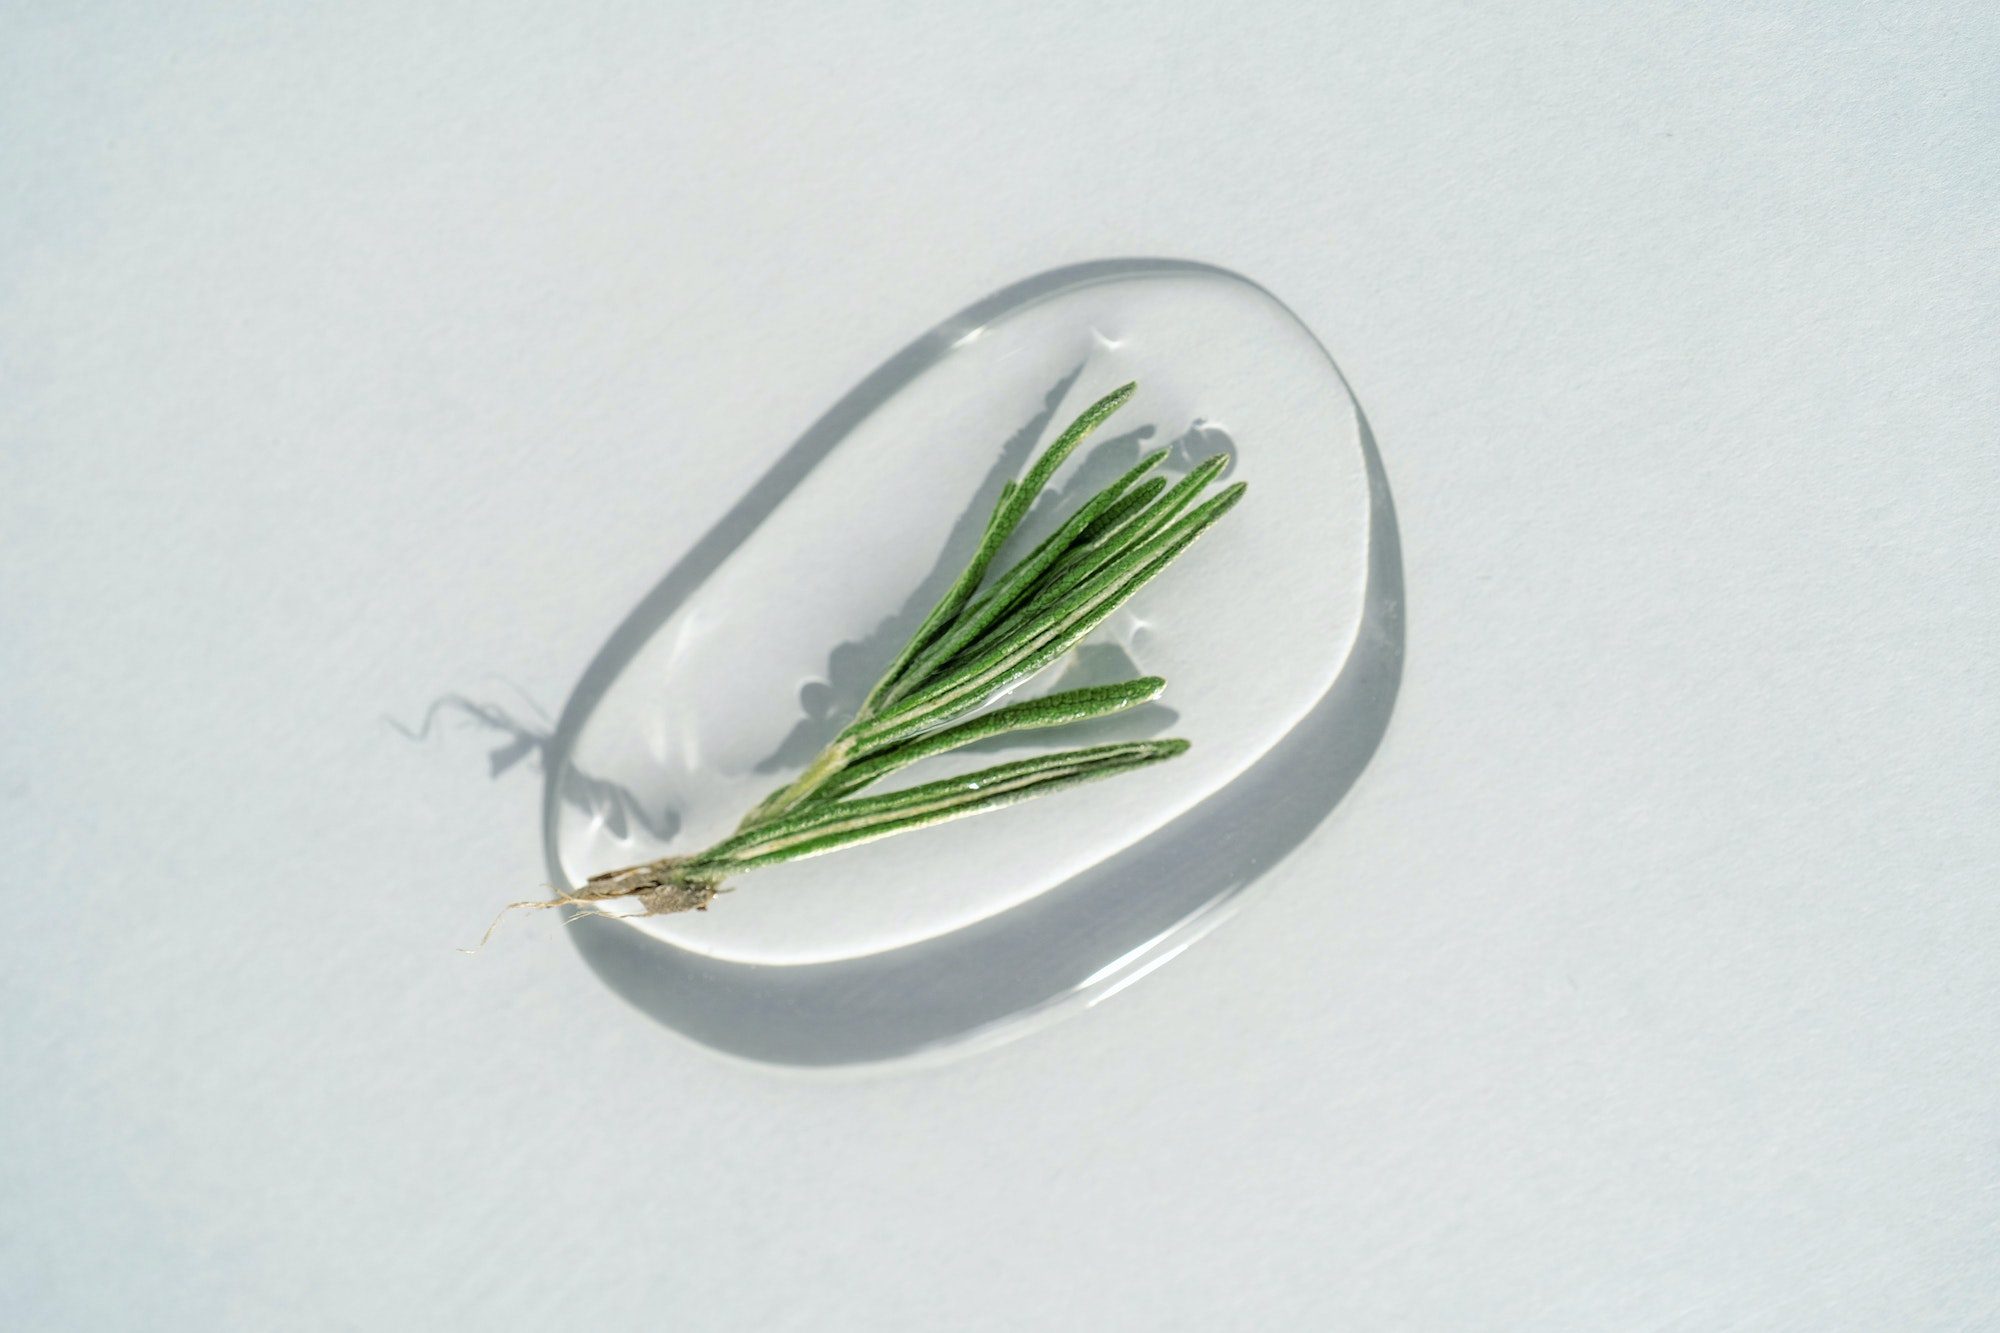 Rosemary Water for hair. A drop of cosmetic gel with rosemary on a blue background.